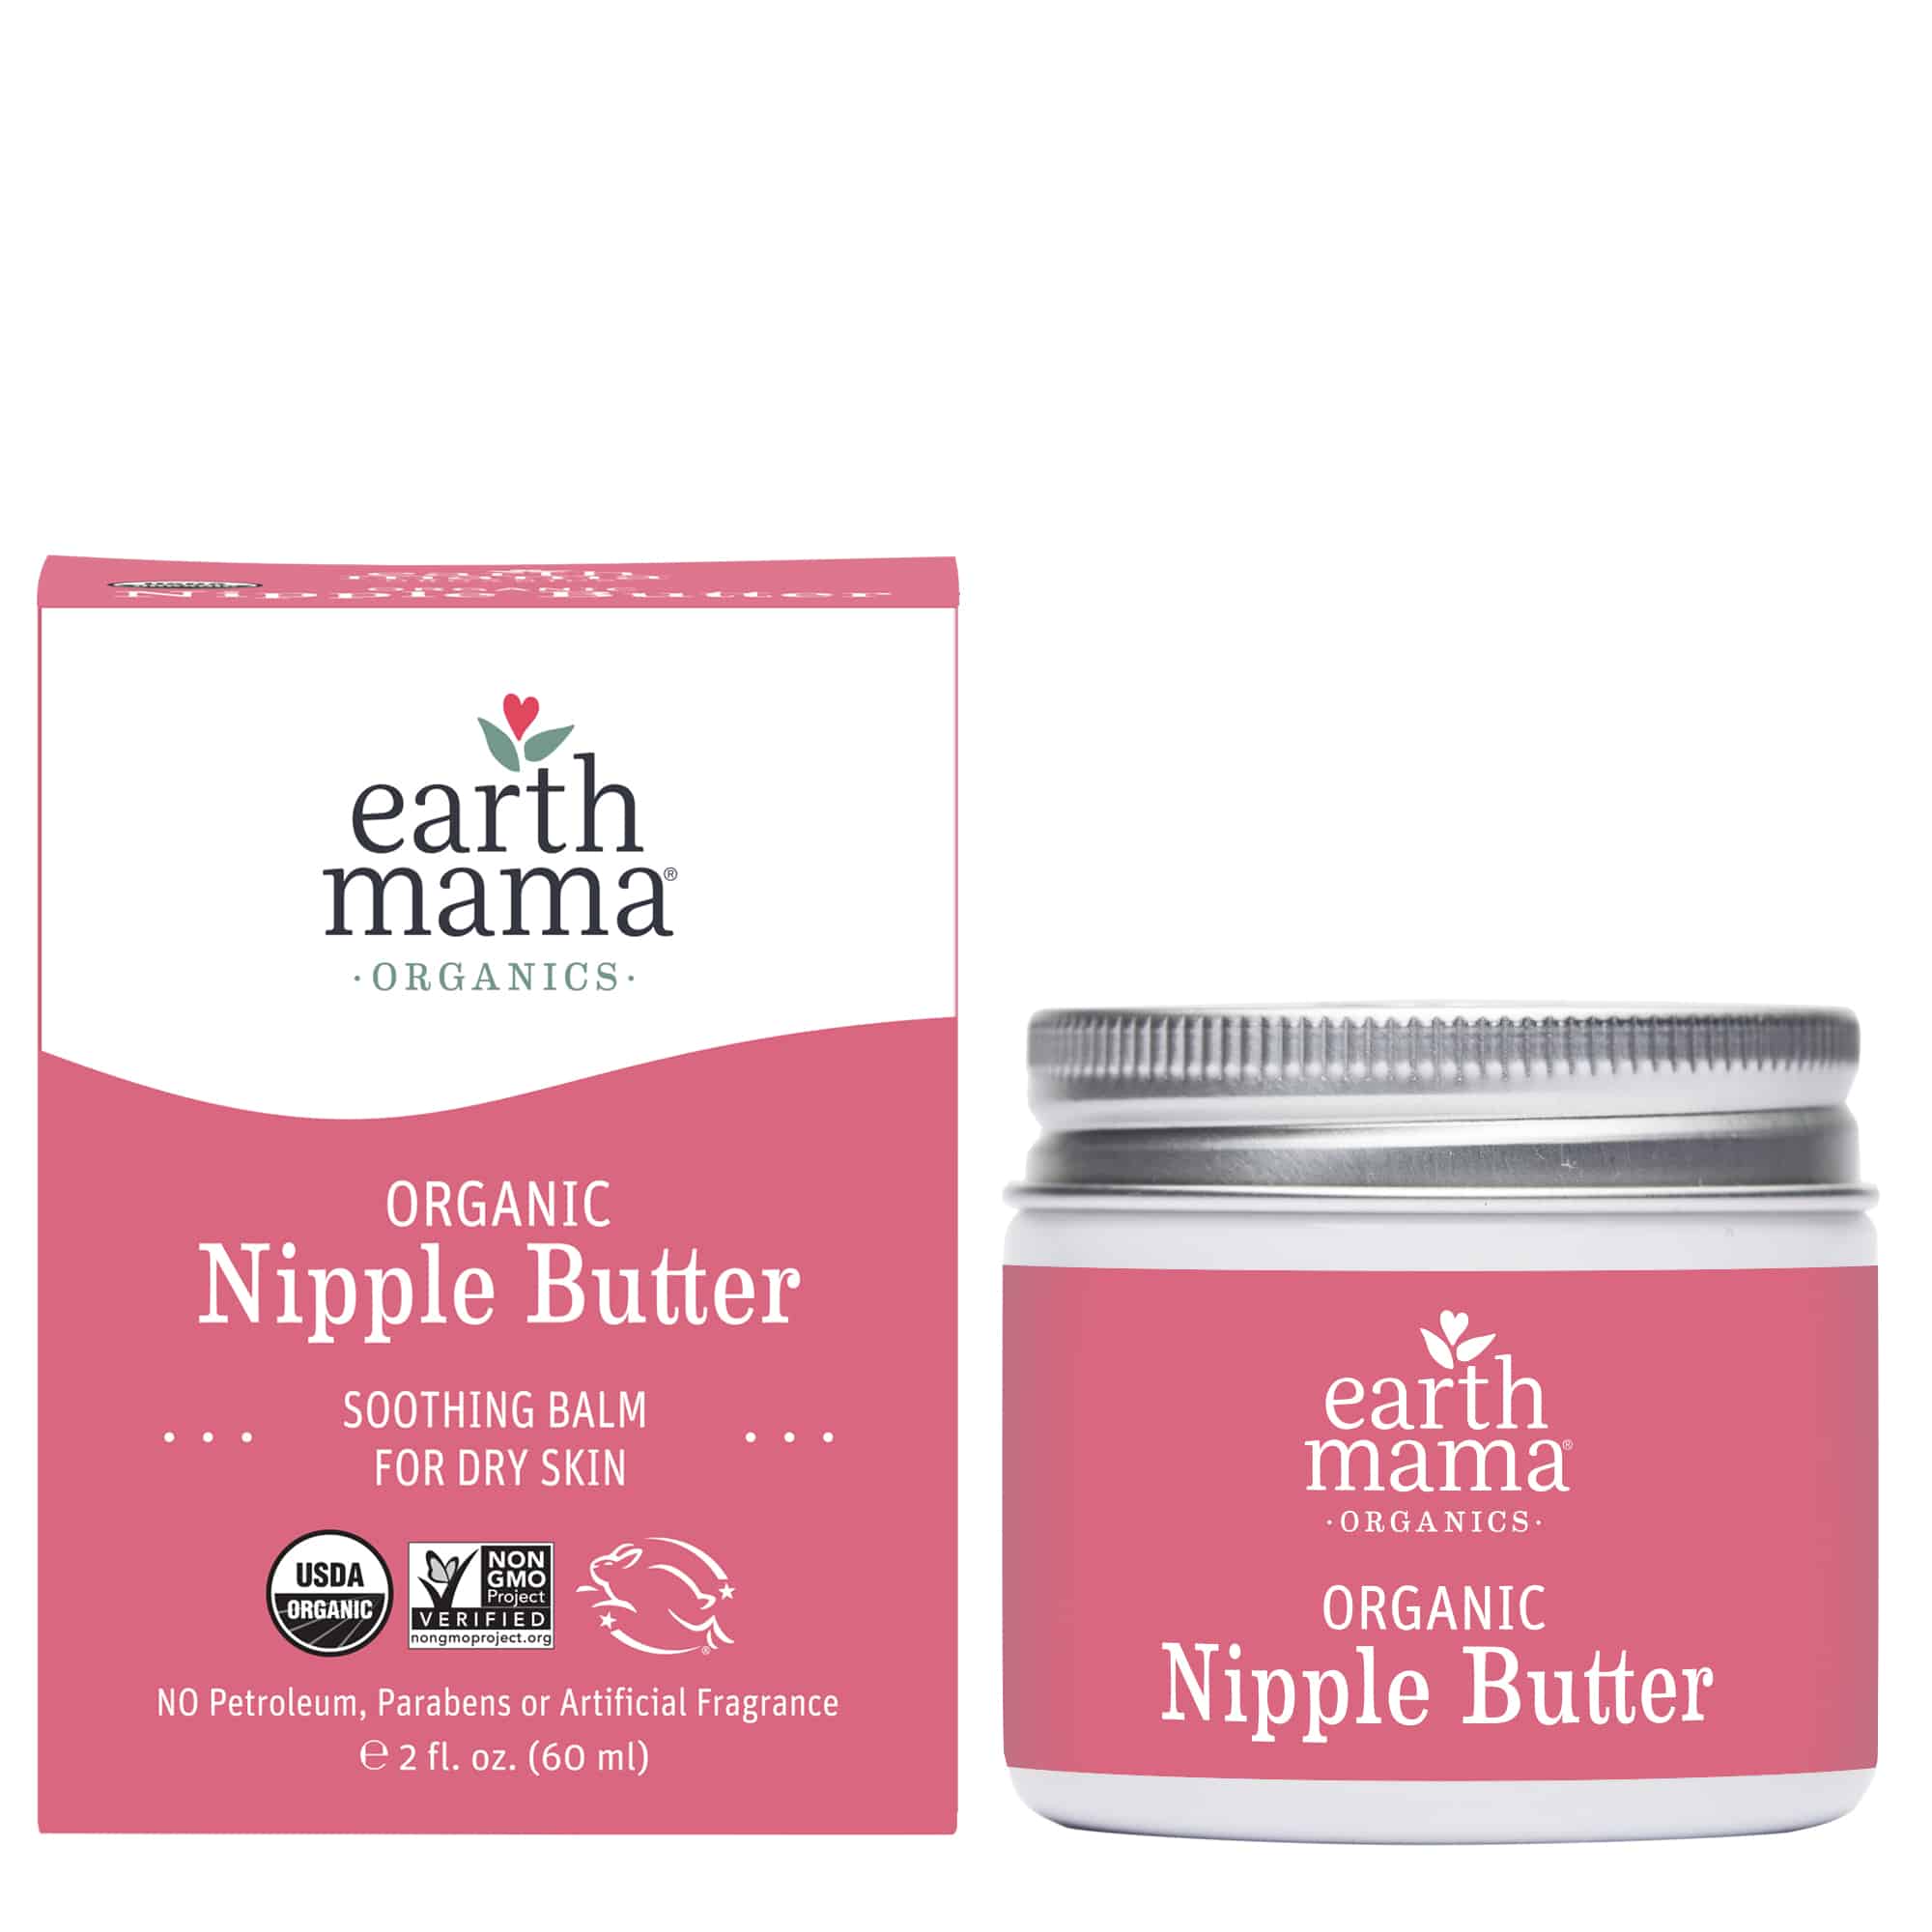 https://archwayboutique.com/wp-content/uploads/2022/10/Earth-Mam-Nipple-Butter-Package.jpg